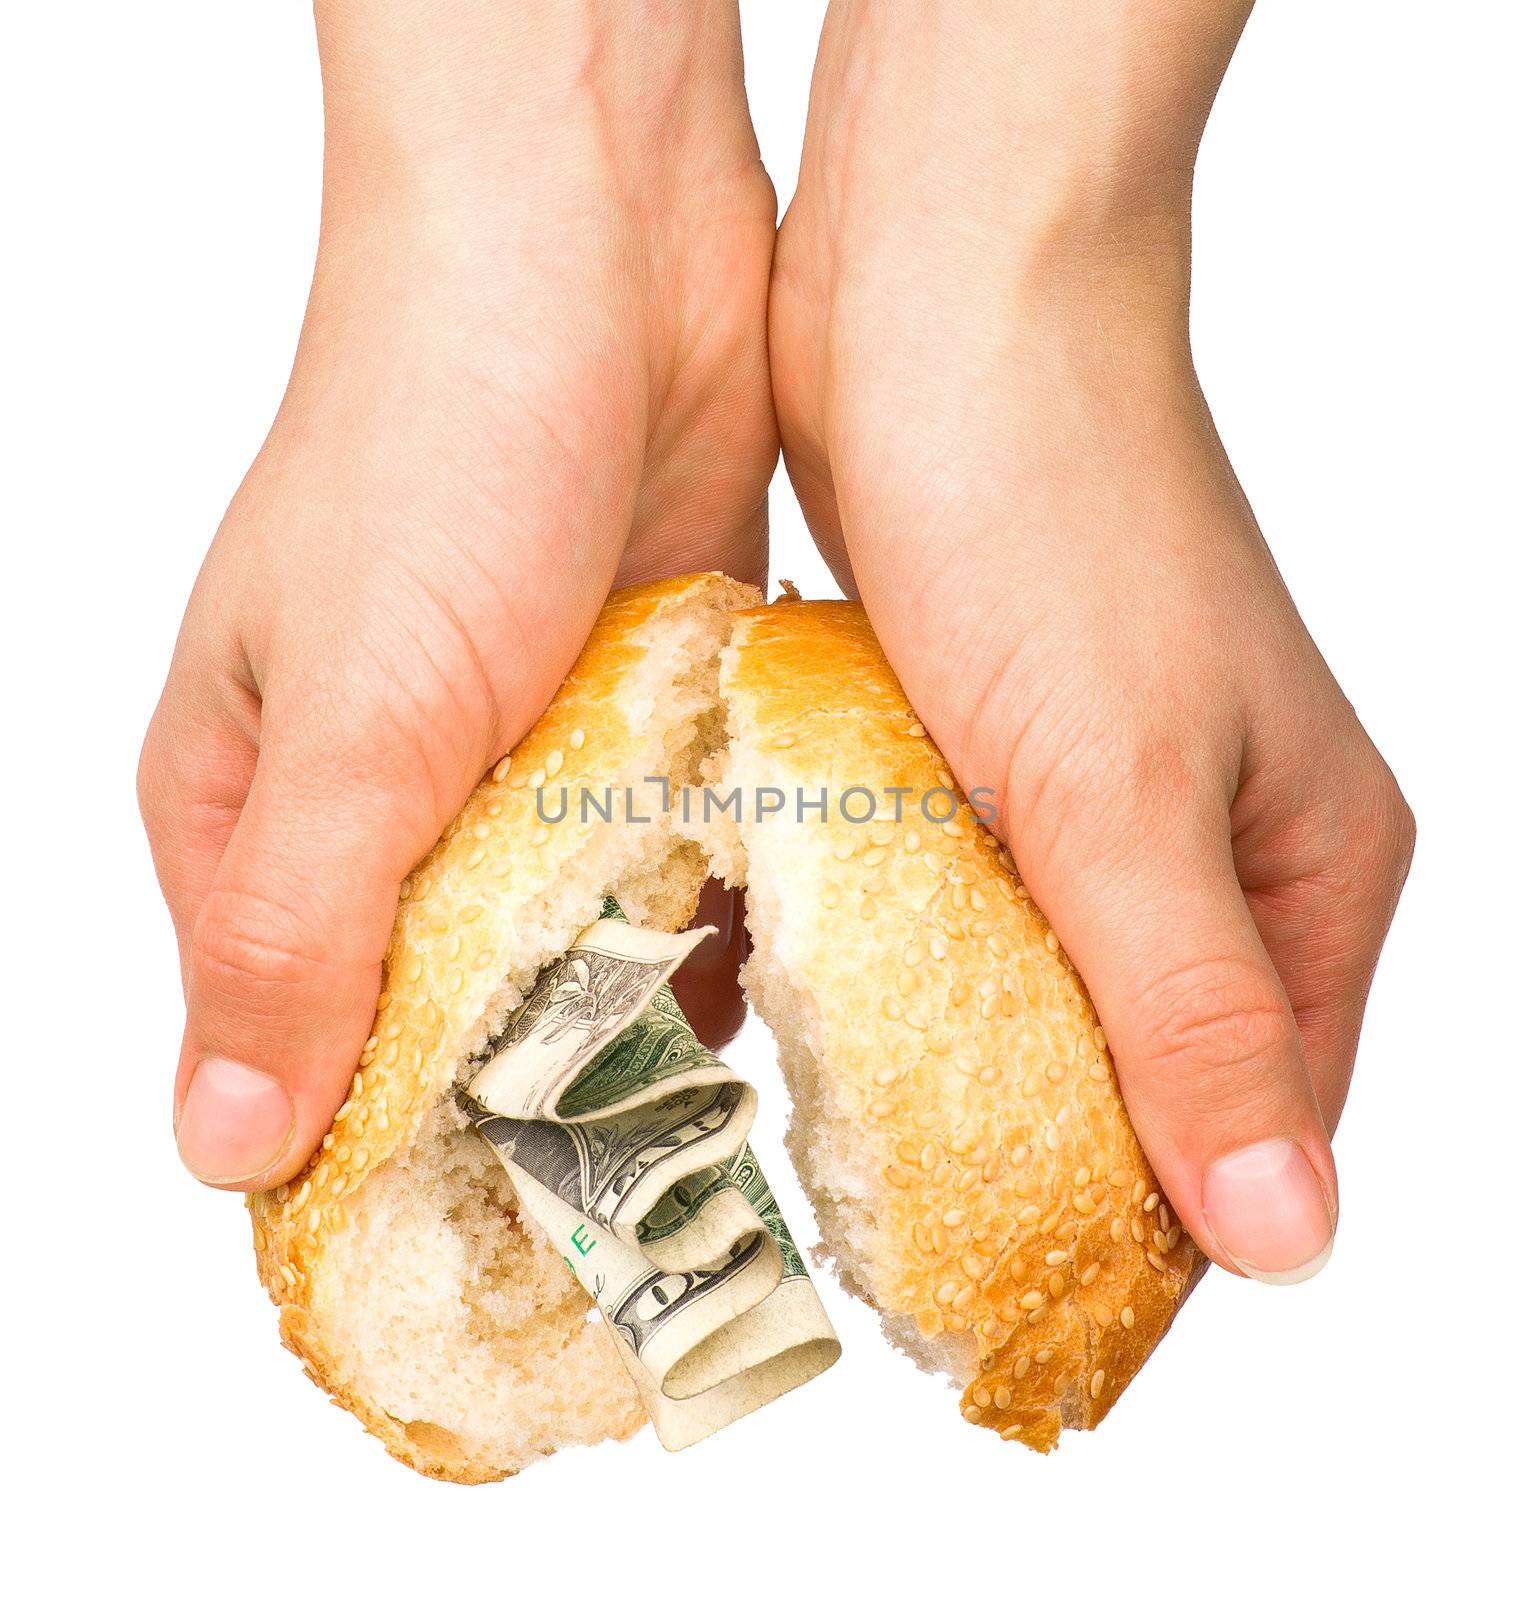 Hands holding the bun stuffed with money